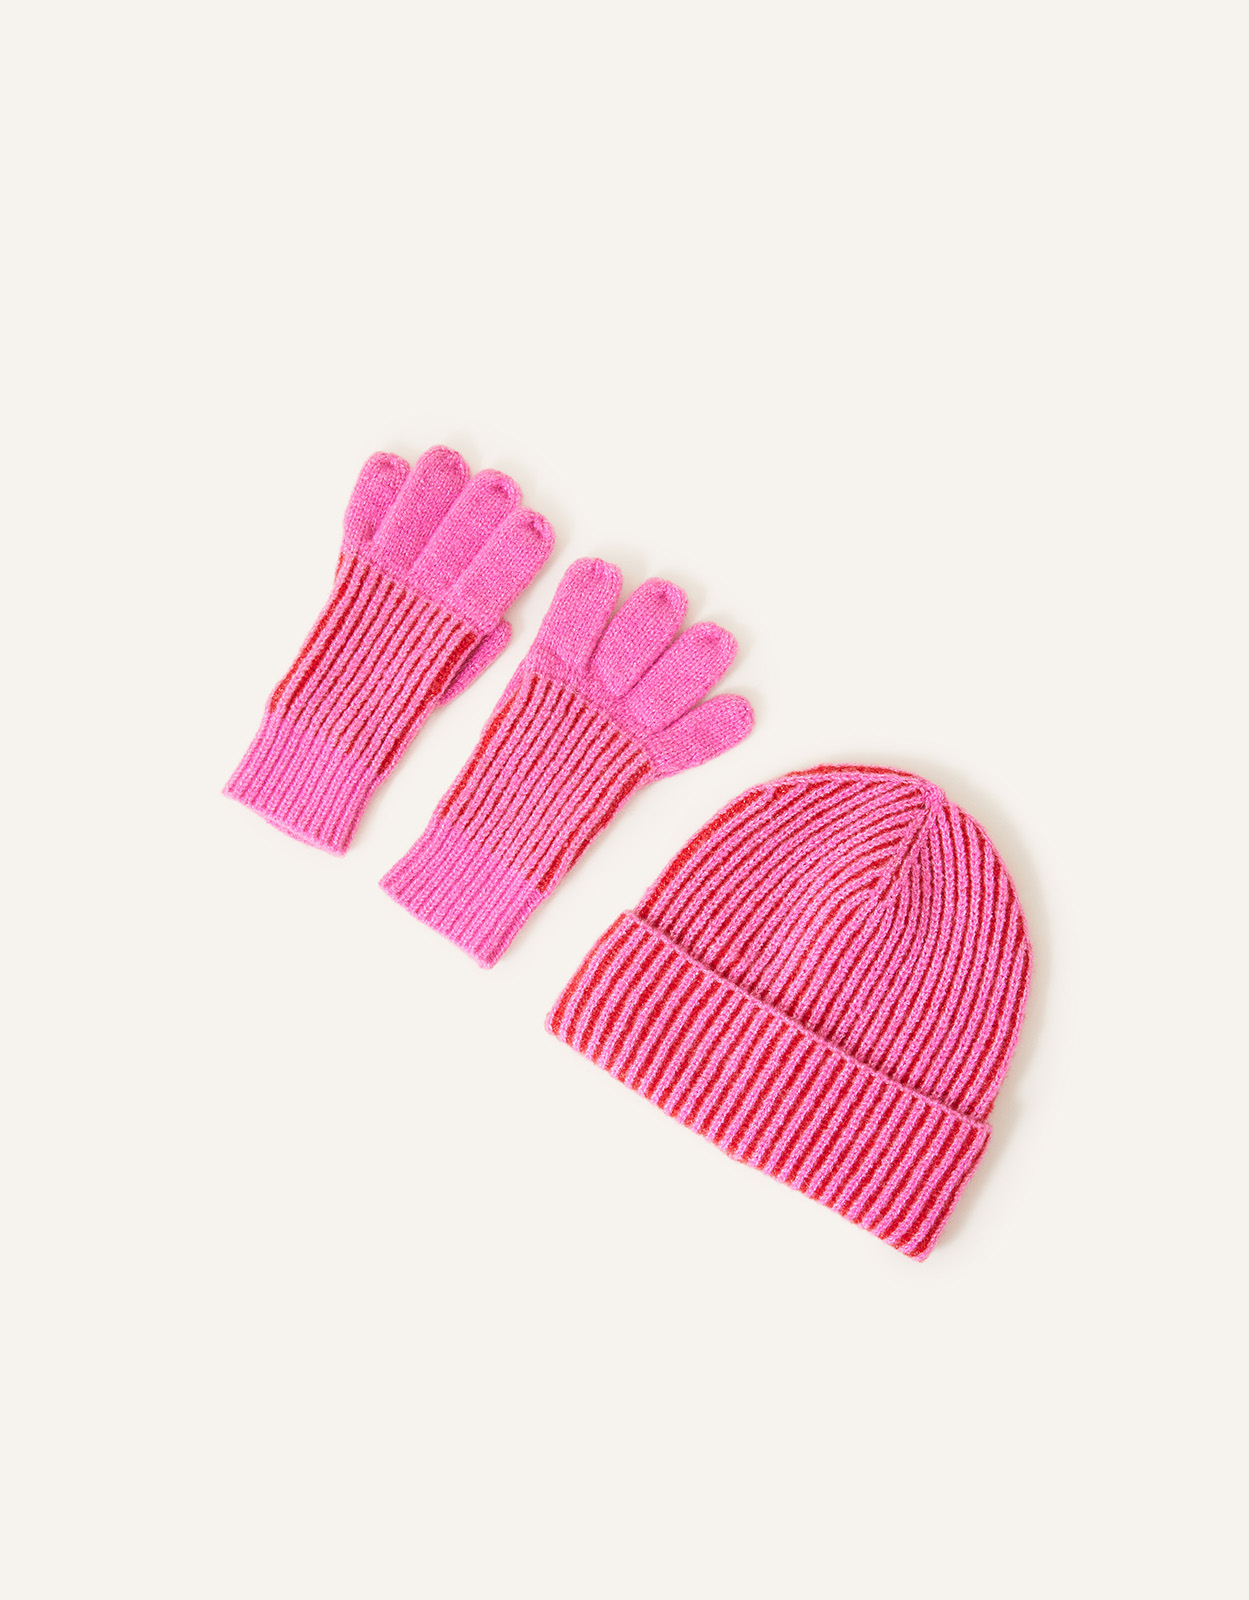 Accessorize Girl's Girls Hat and Gloves Set Pink, Size: 9-12 yrs